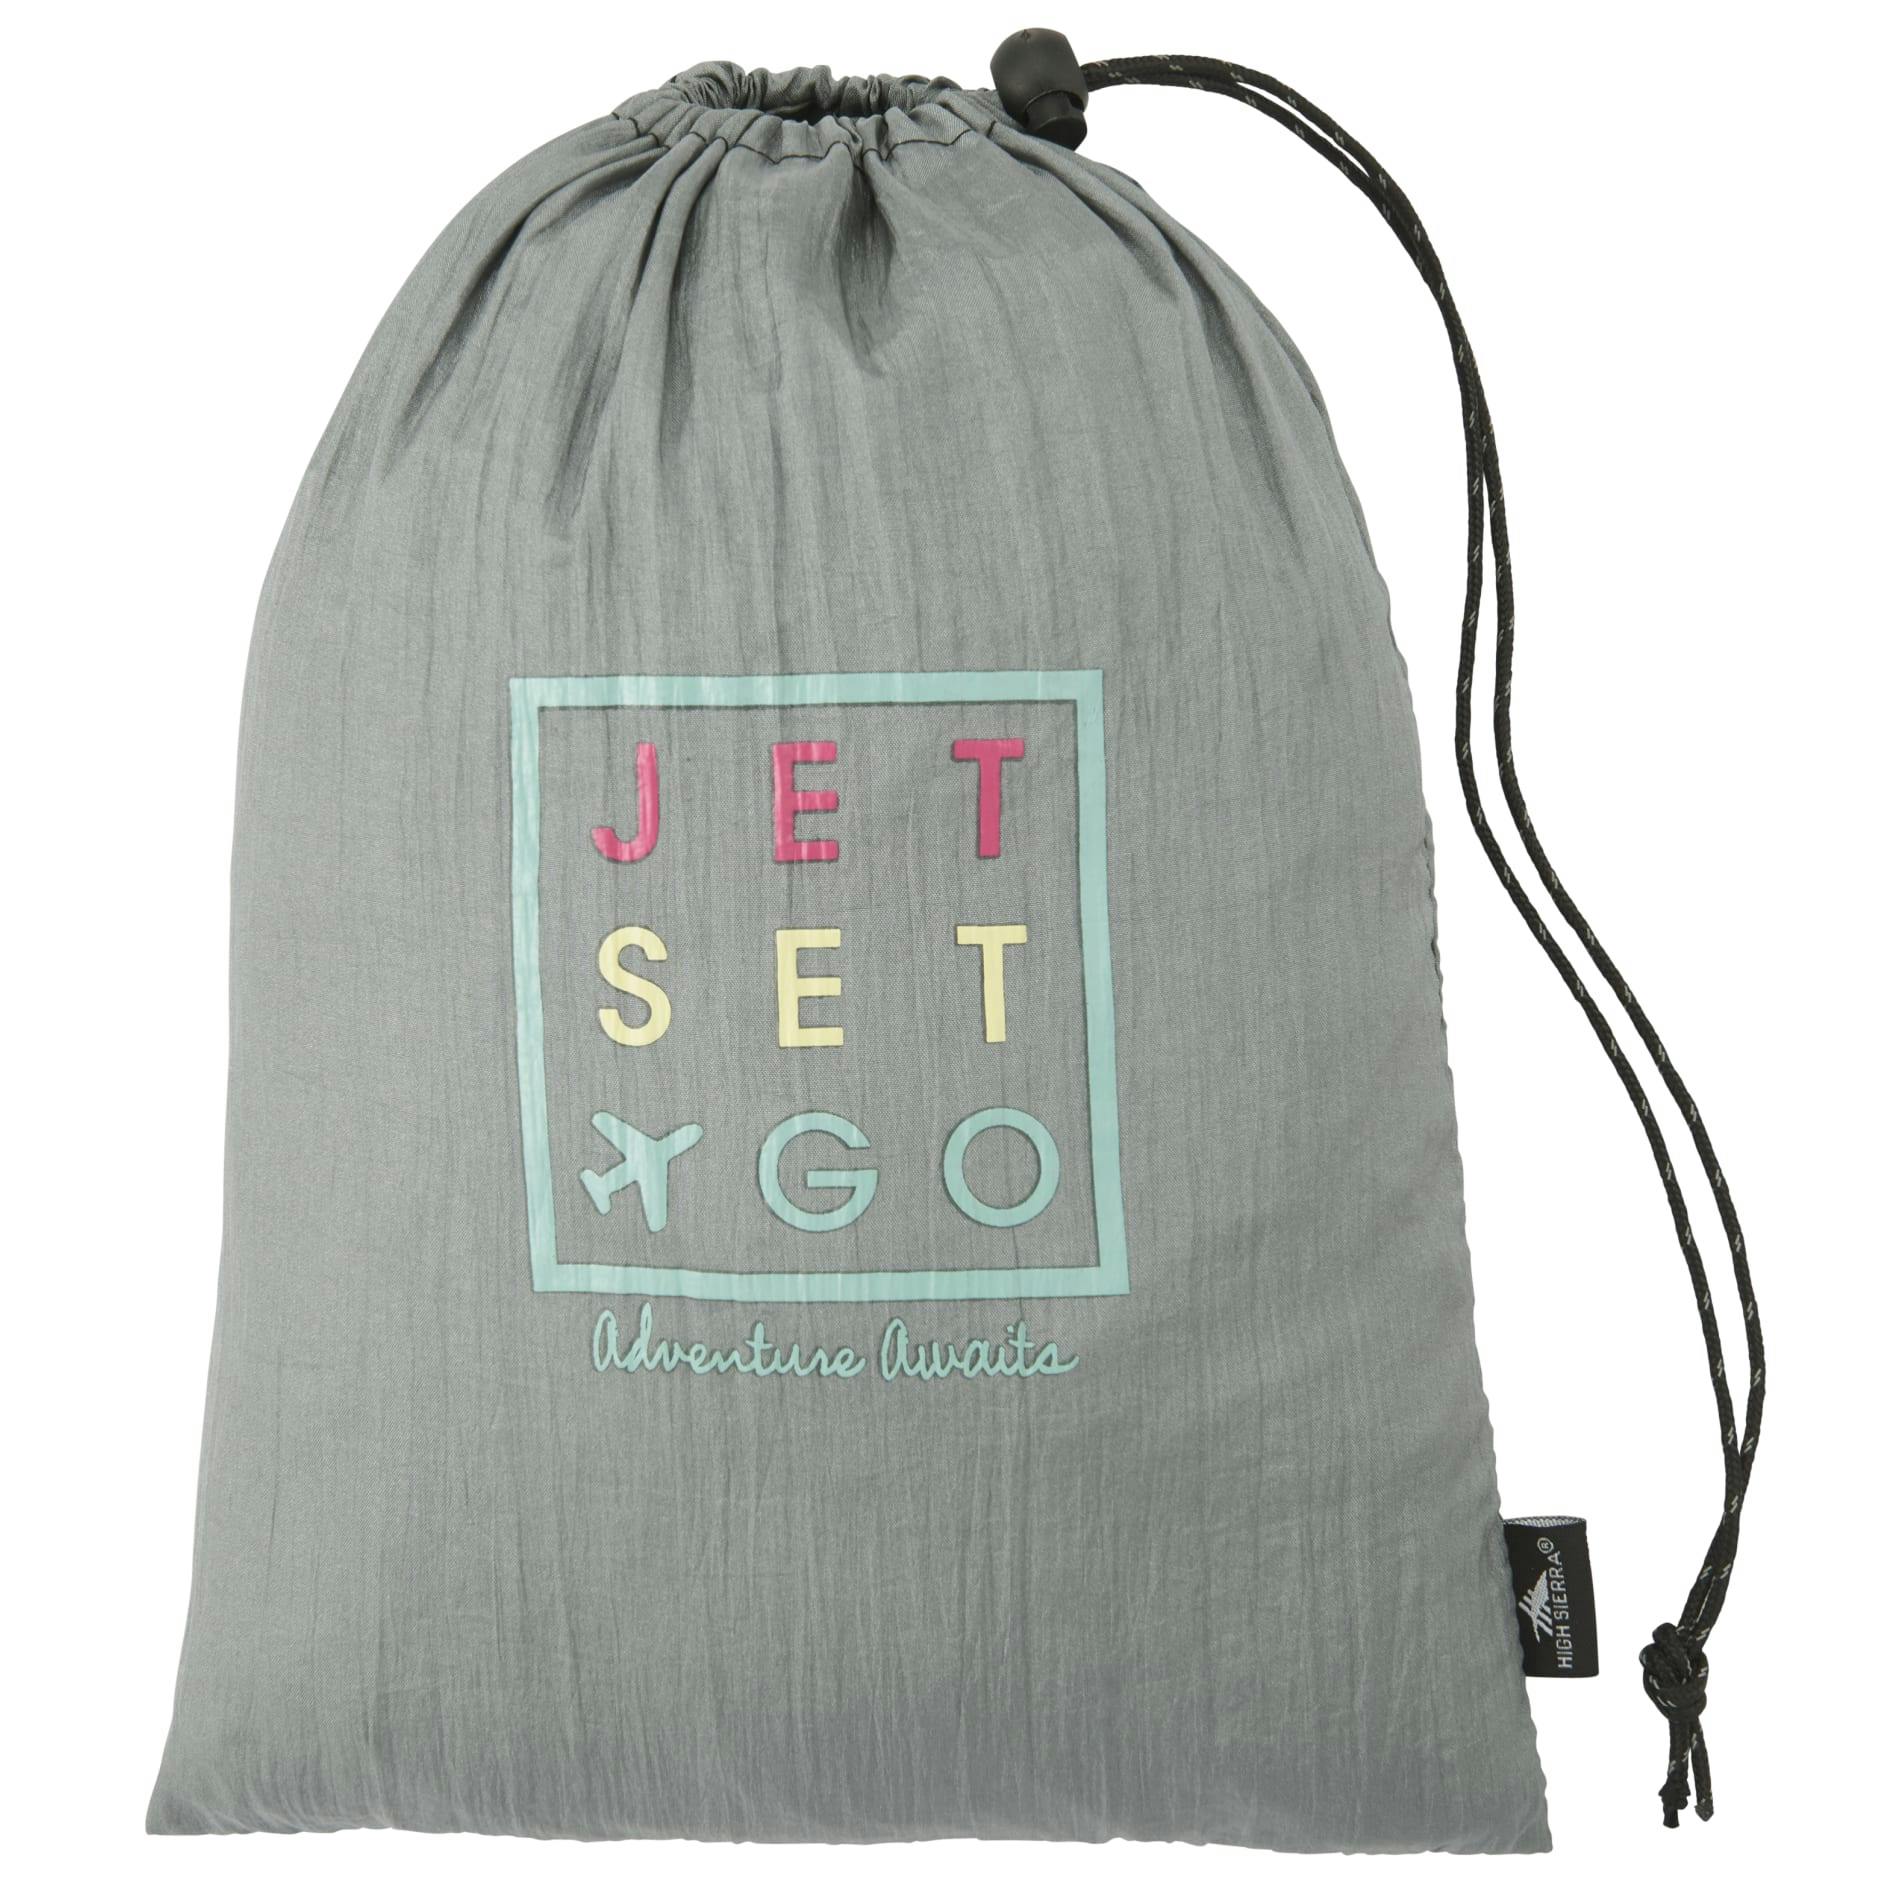 High Sierra Packable Hammock with Straps - additional Image 1